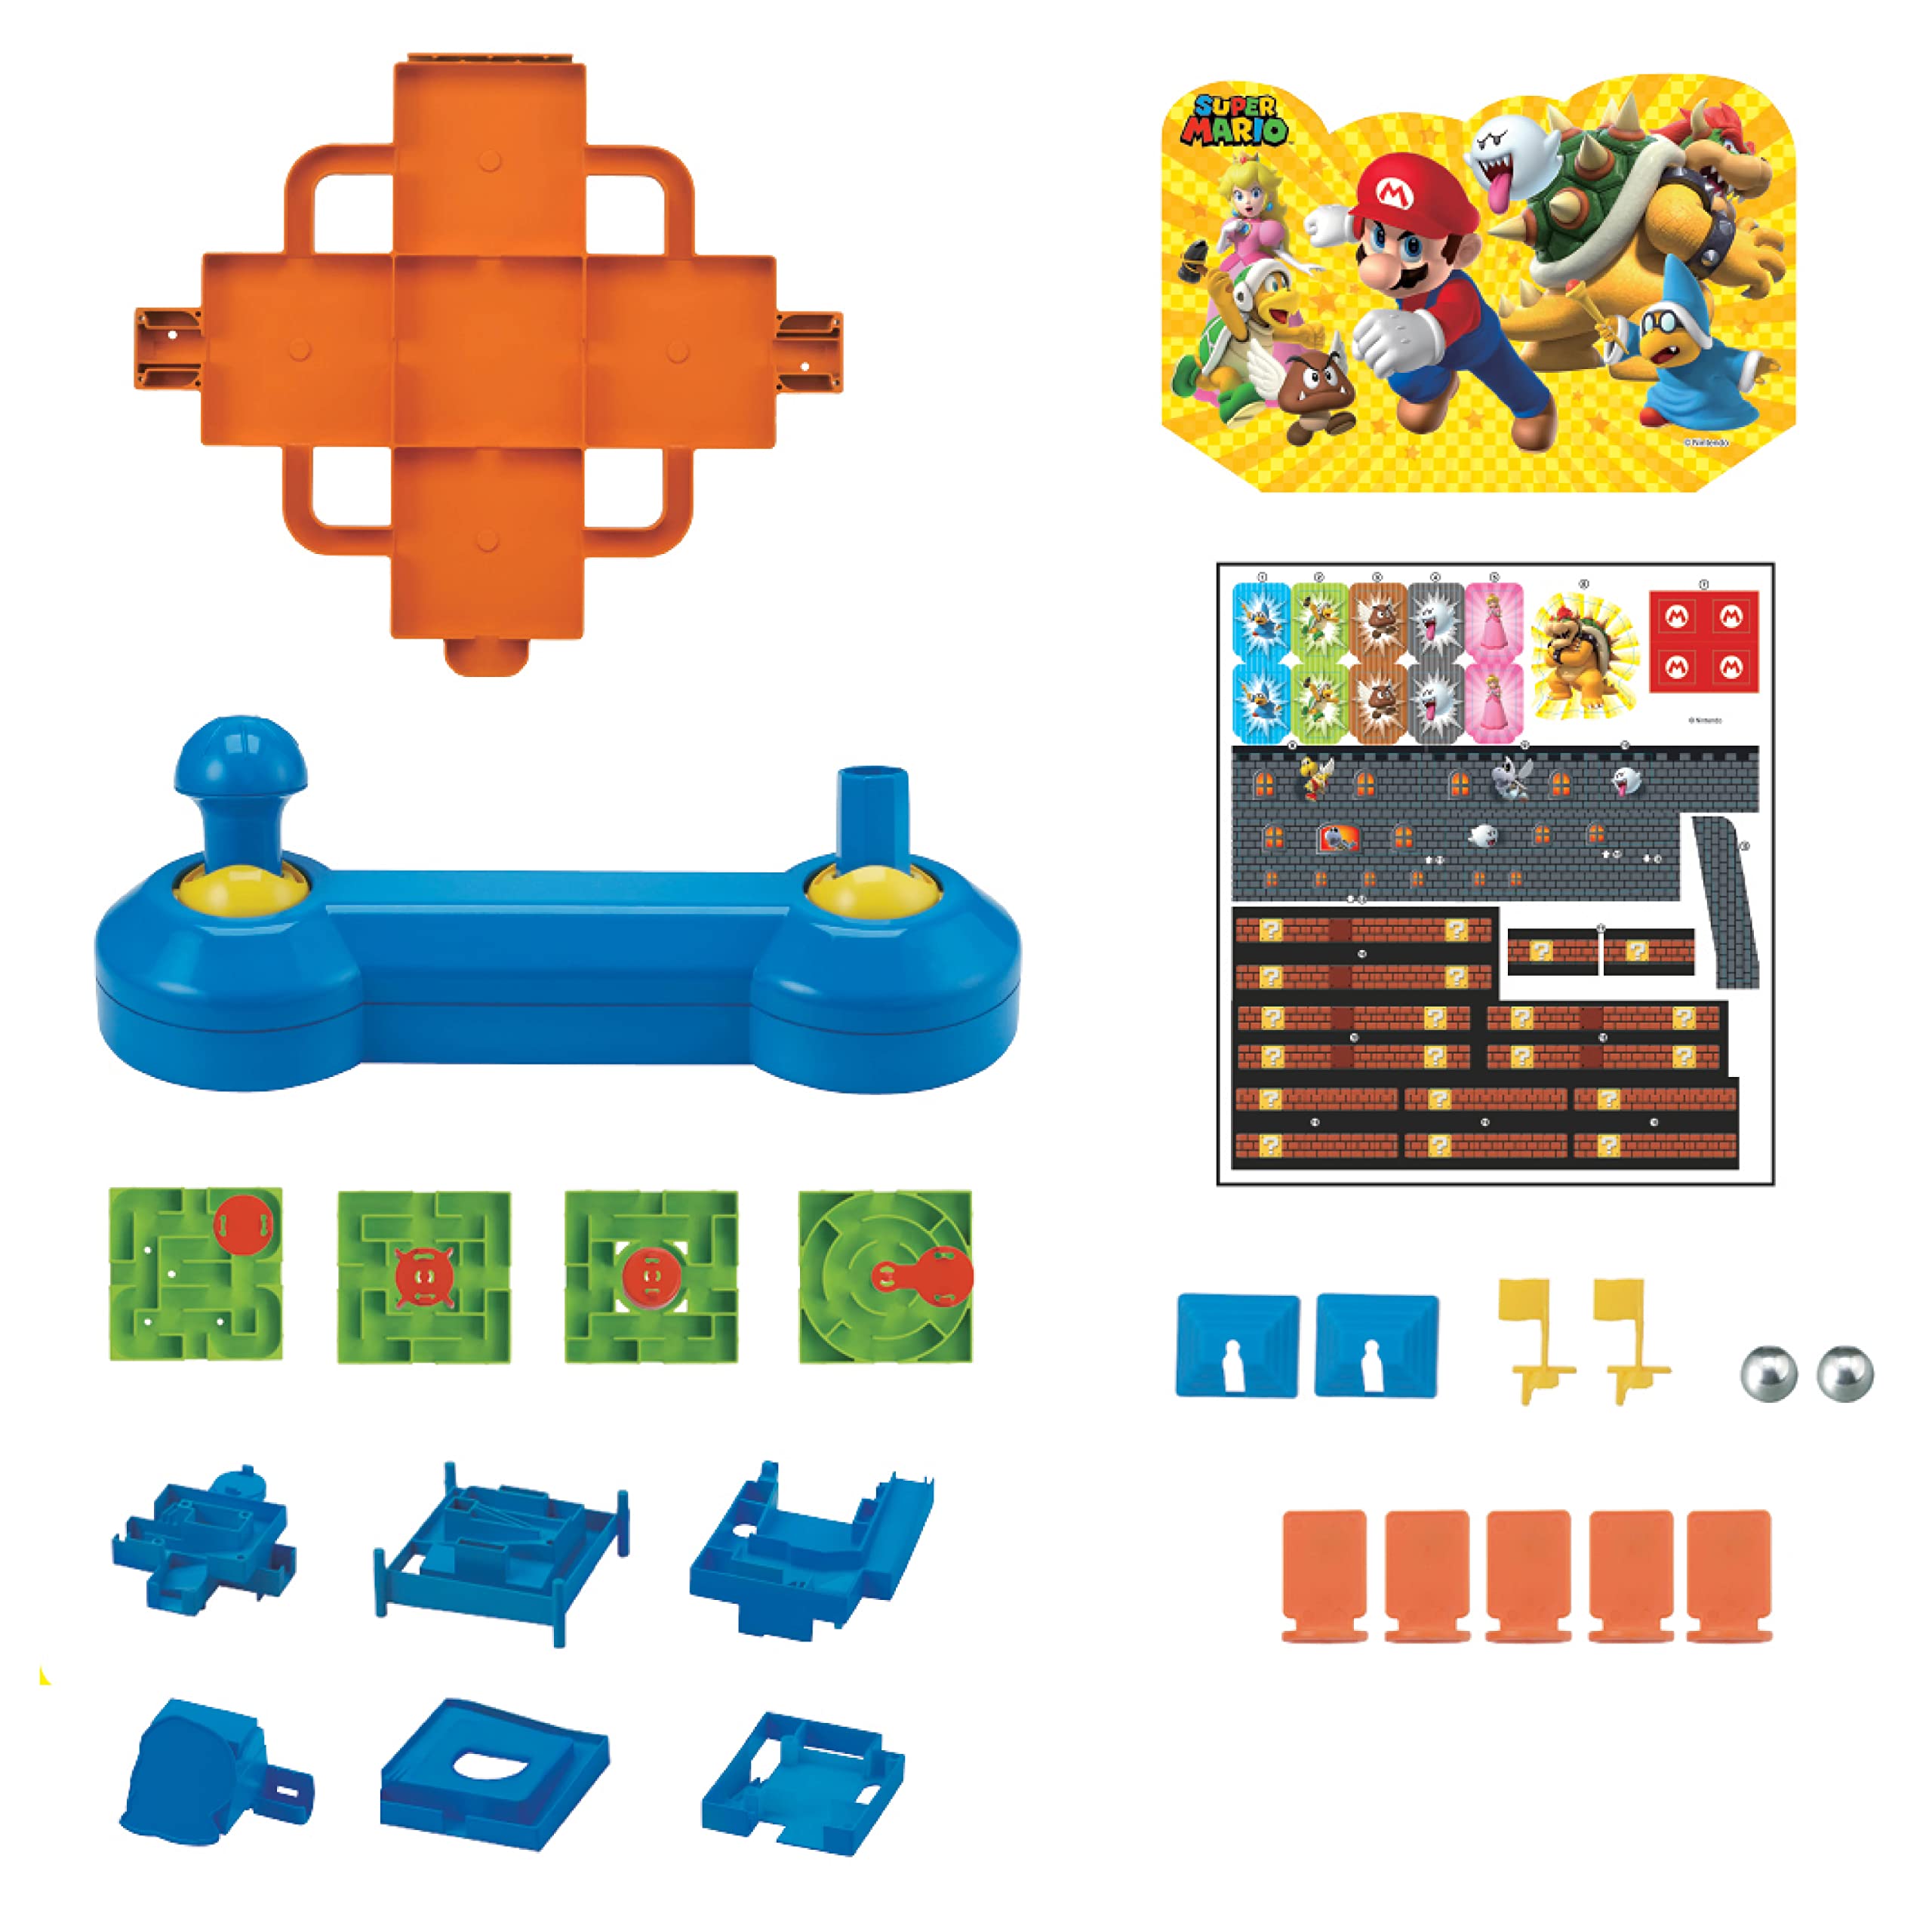 EPOCH Super Mario Maze Game Deluxe from, Single Player Tabletop Action Game for Ages 4+, Multi